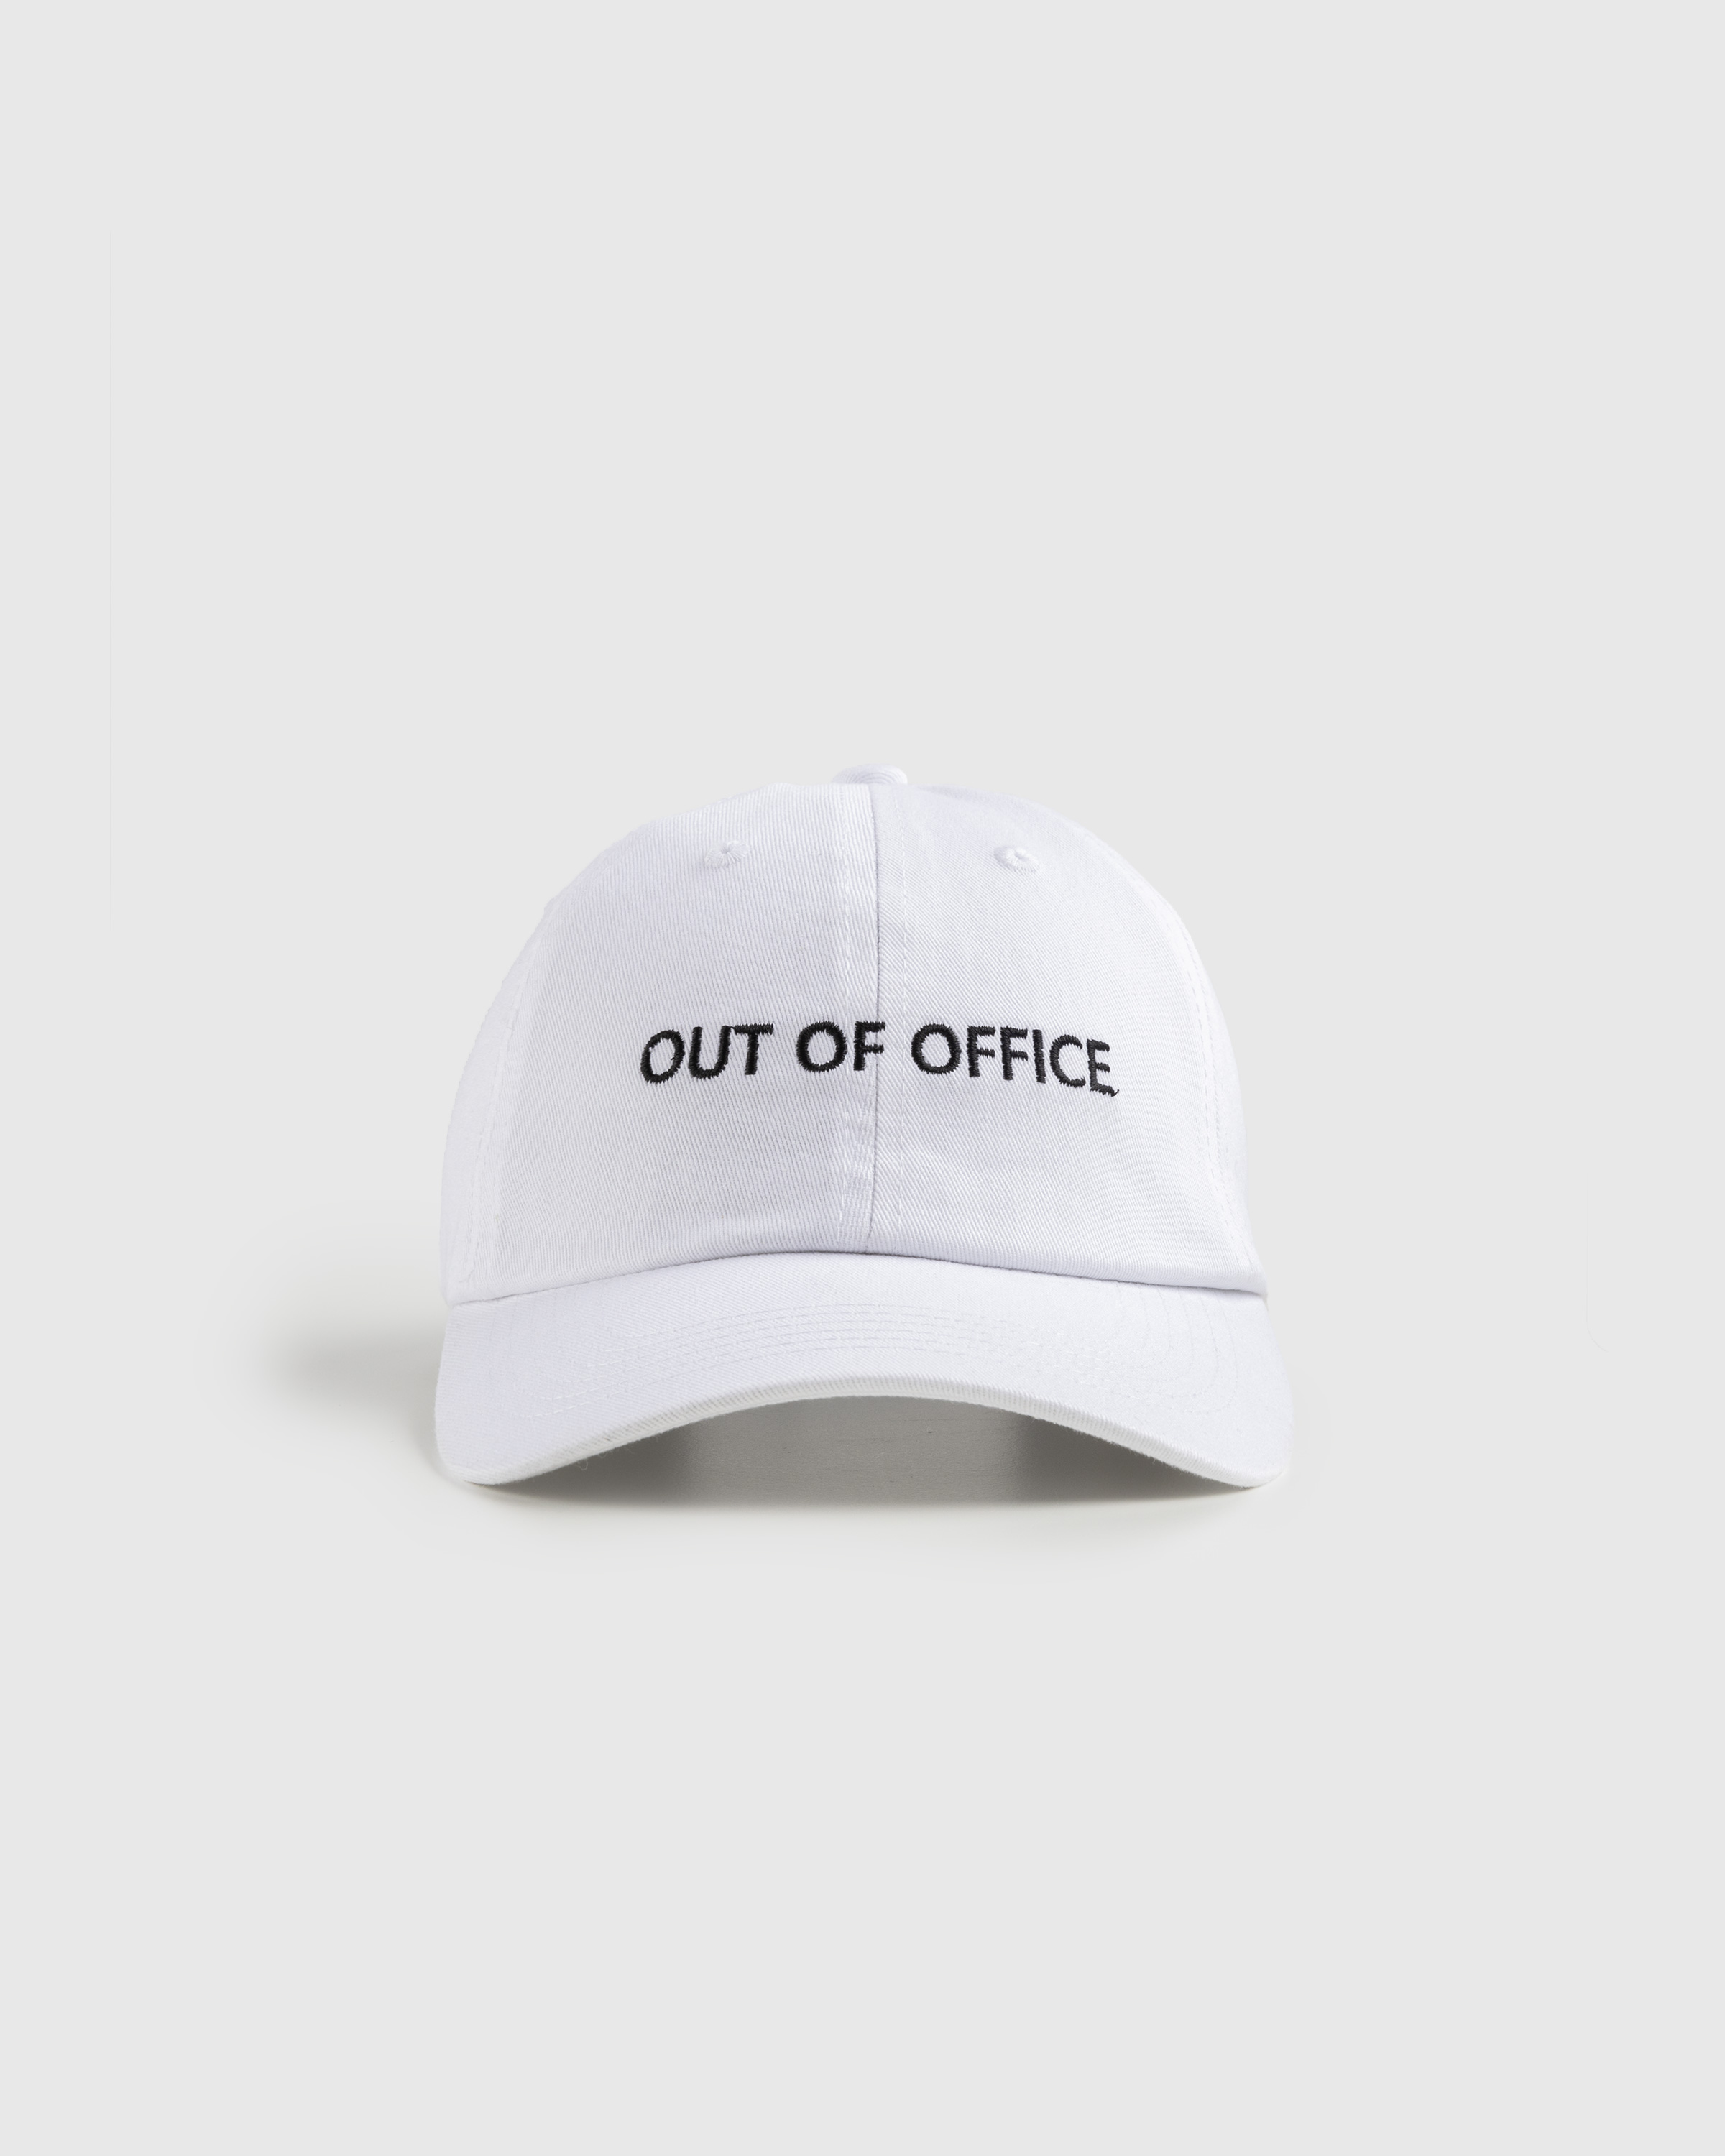 HO HO COCO – Out Of Office Hat White/Black - Caps - White - Image 4